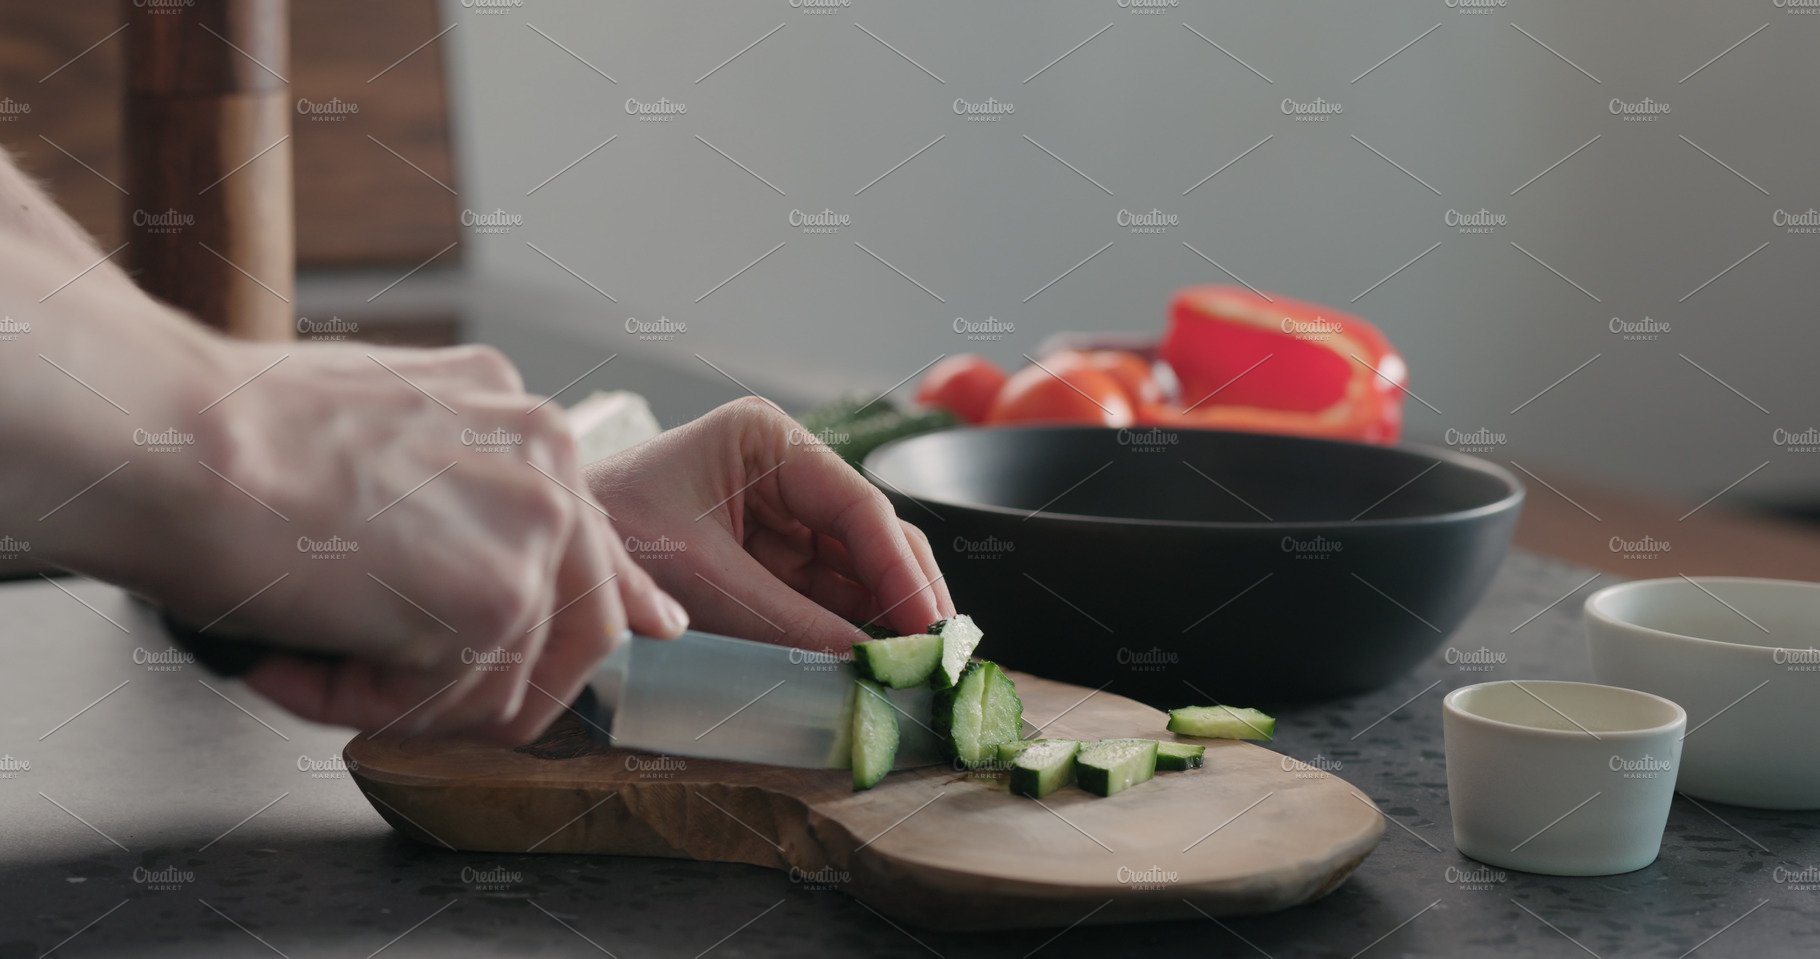 Man chopping cucumber on olive wood cover image.